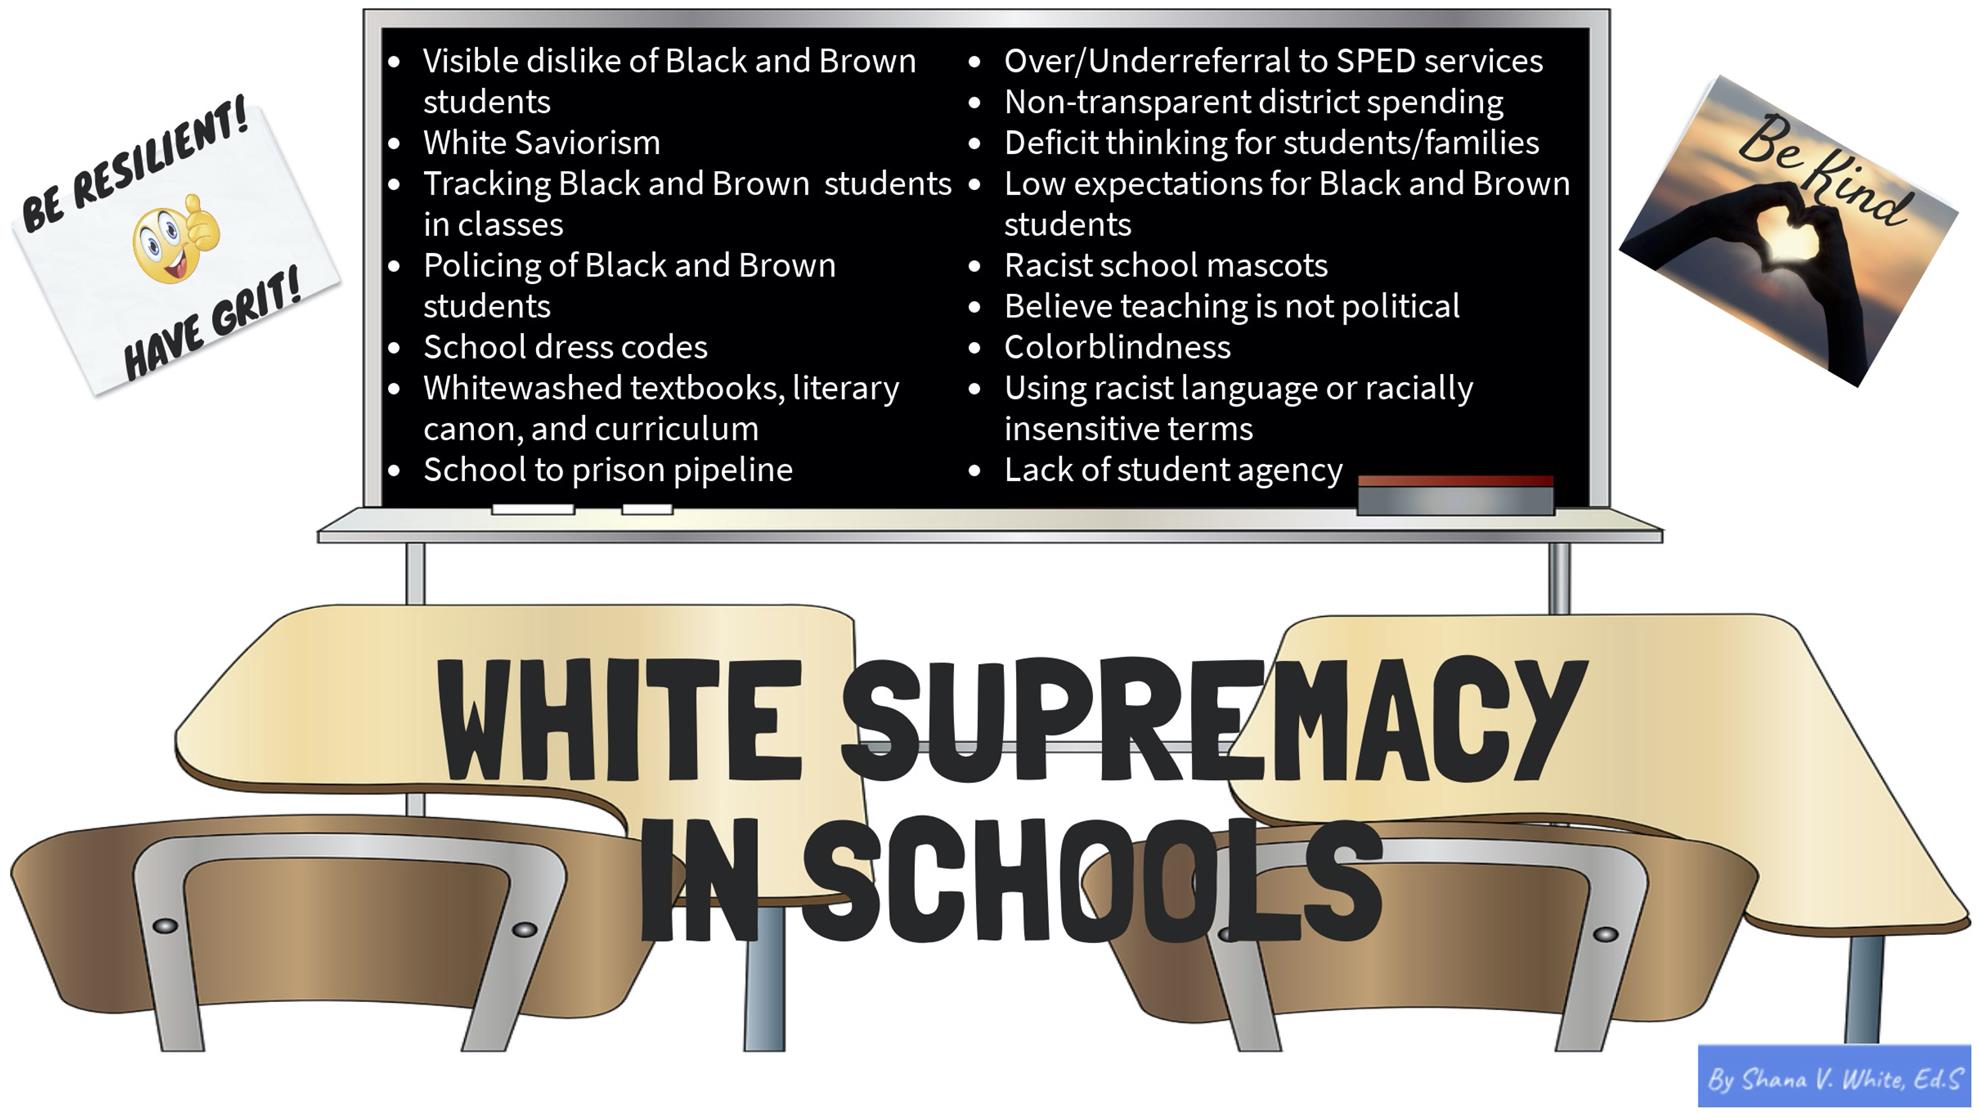 characteristics of how white supremacy culture manifests in schools and classrooms